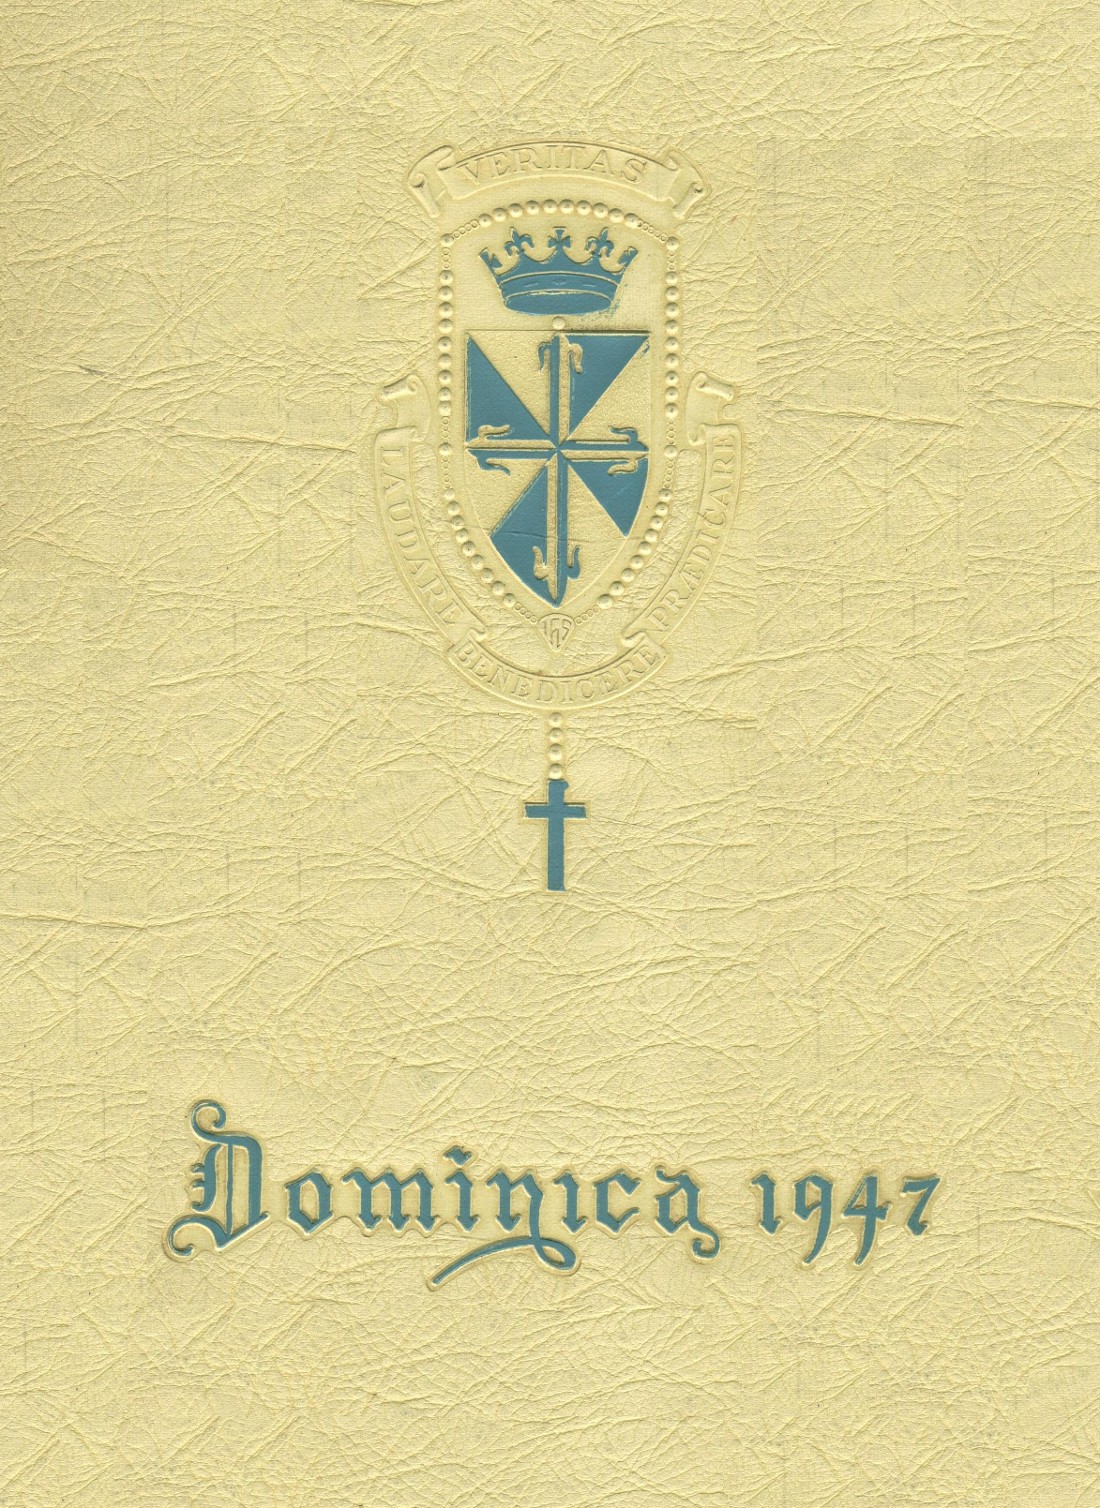 St. Dominic Academy from Jersey city, New Jersey Yearbooks